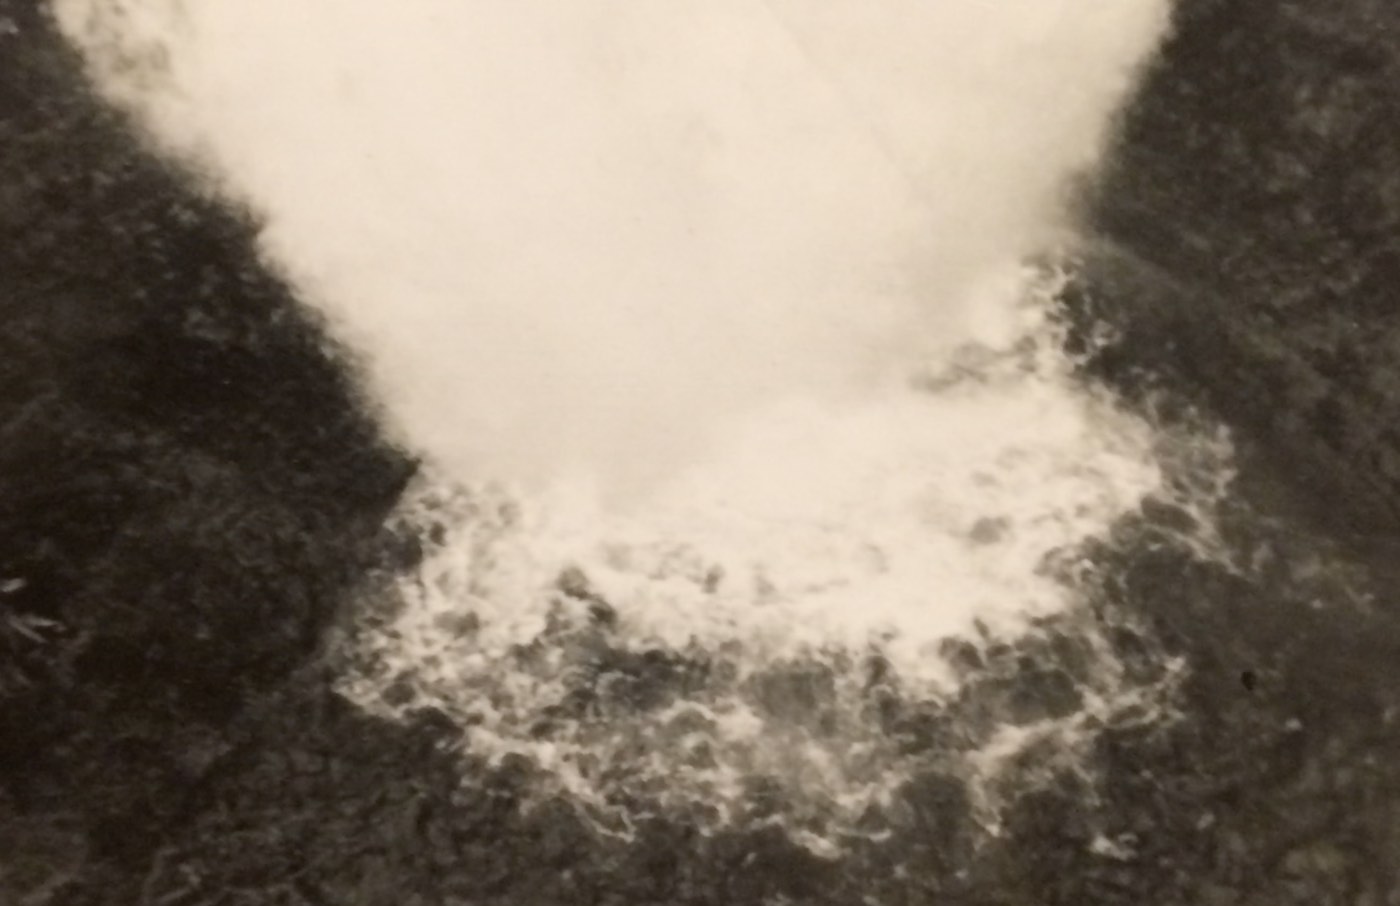 A sepia-toned photograph of a waterfall.